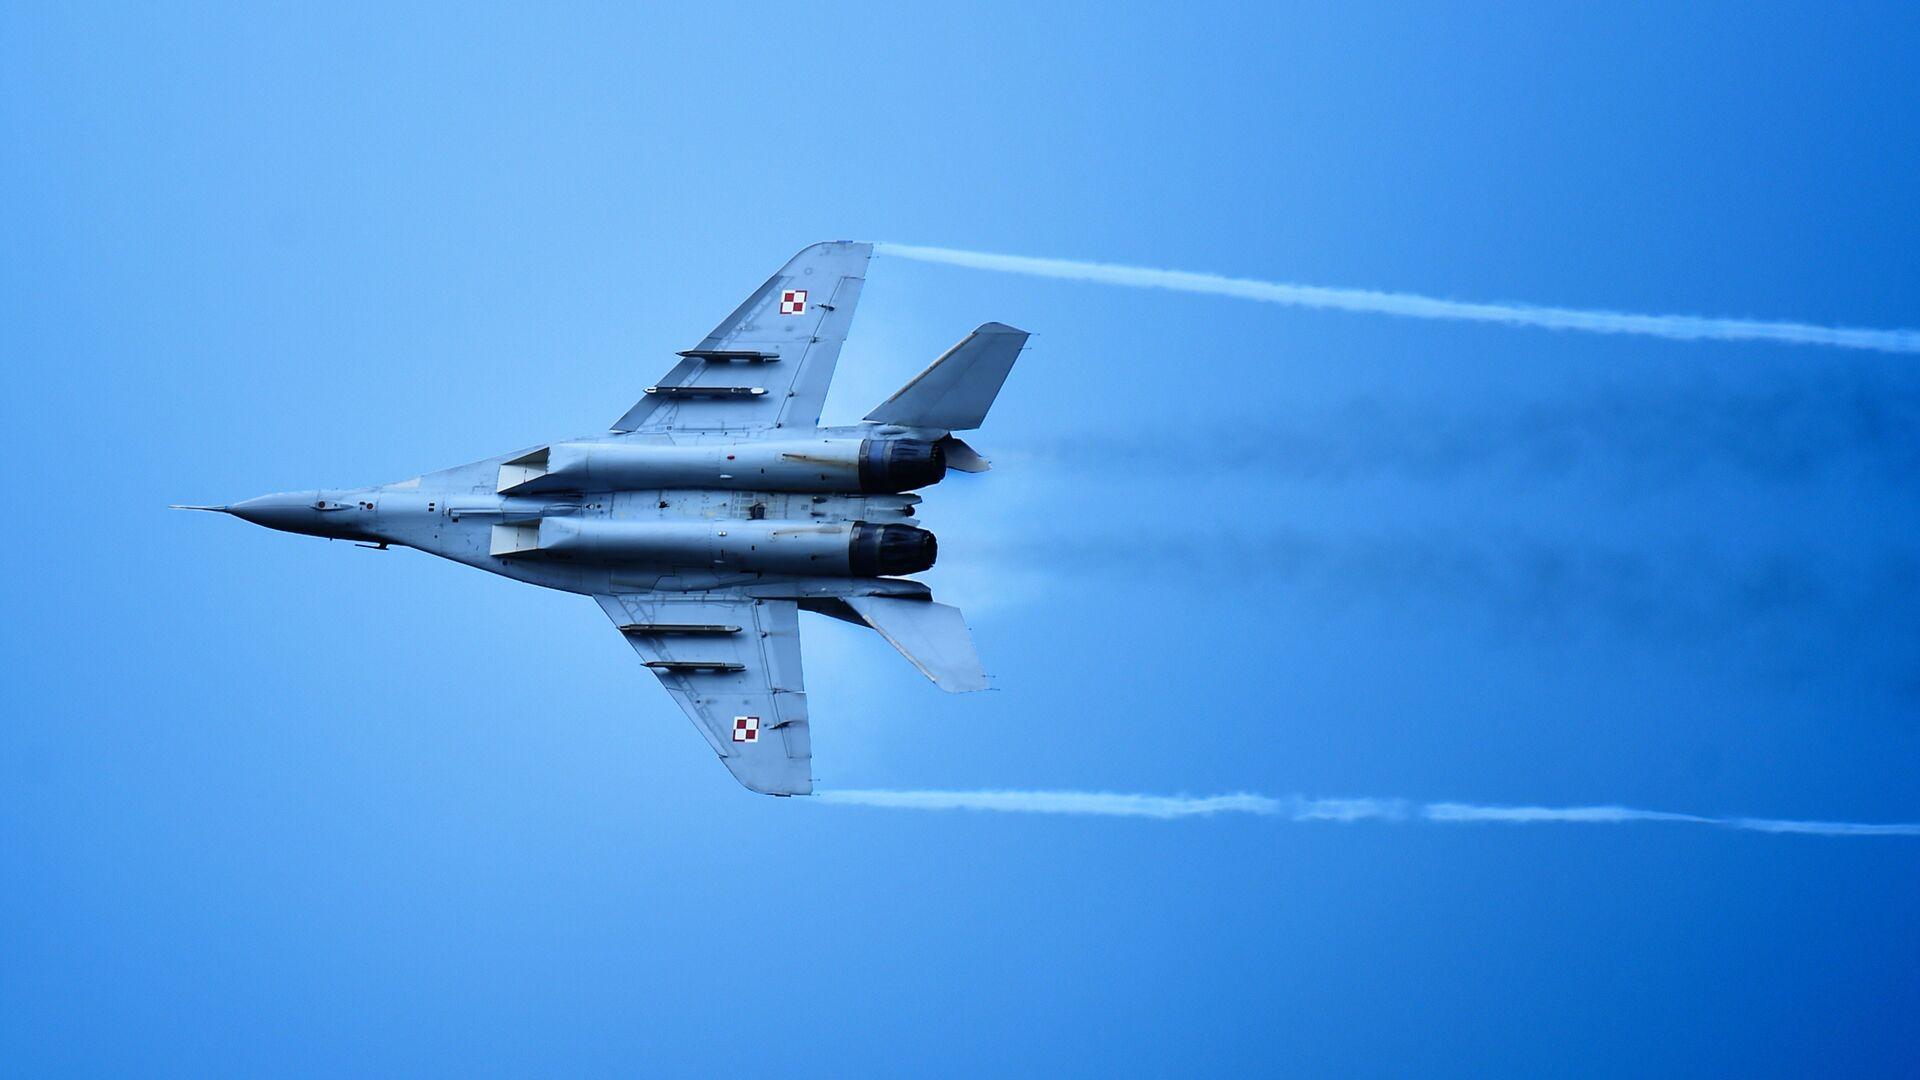 Germany approved Poland's application for the export of the MiG-29 to Ukraine